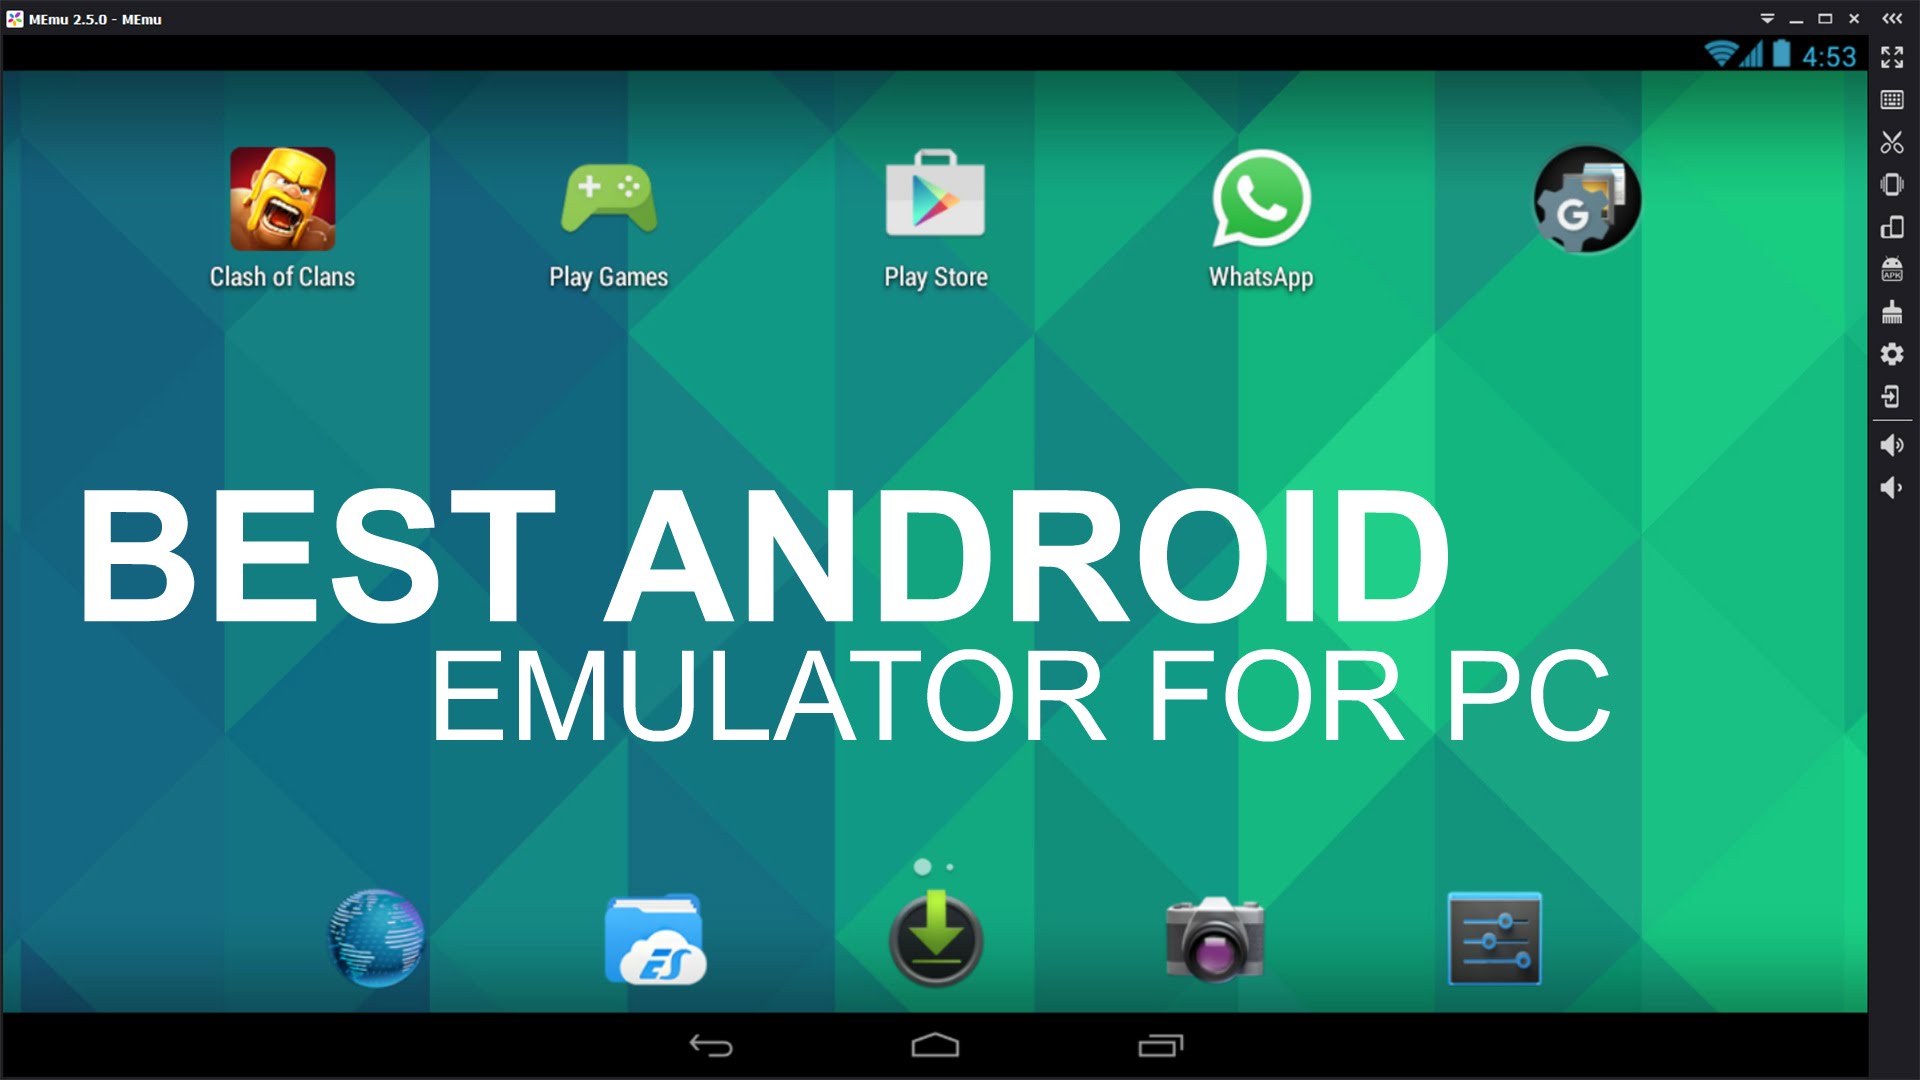 emulator for android in mac